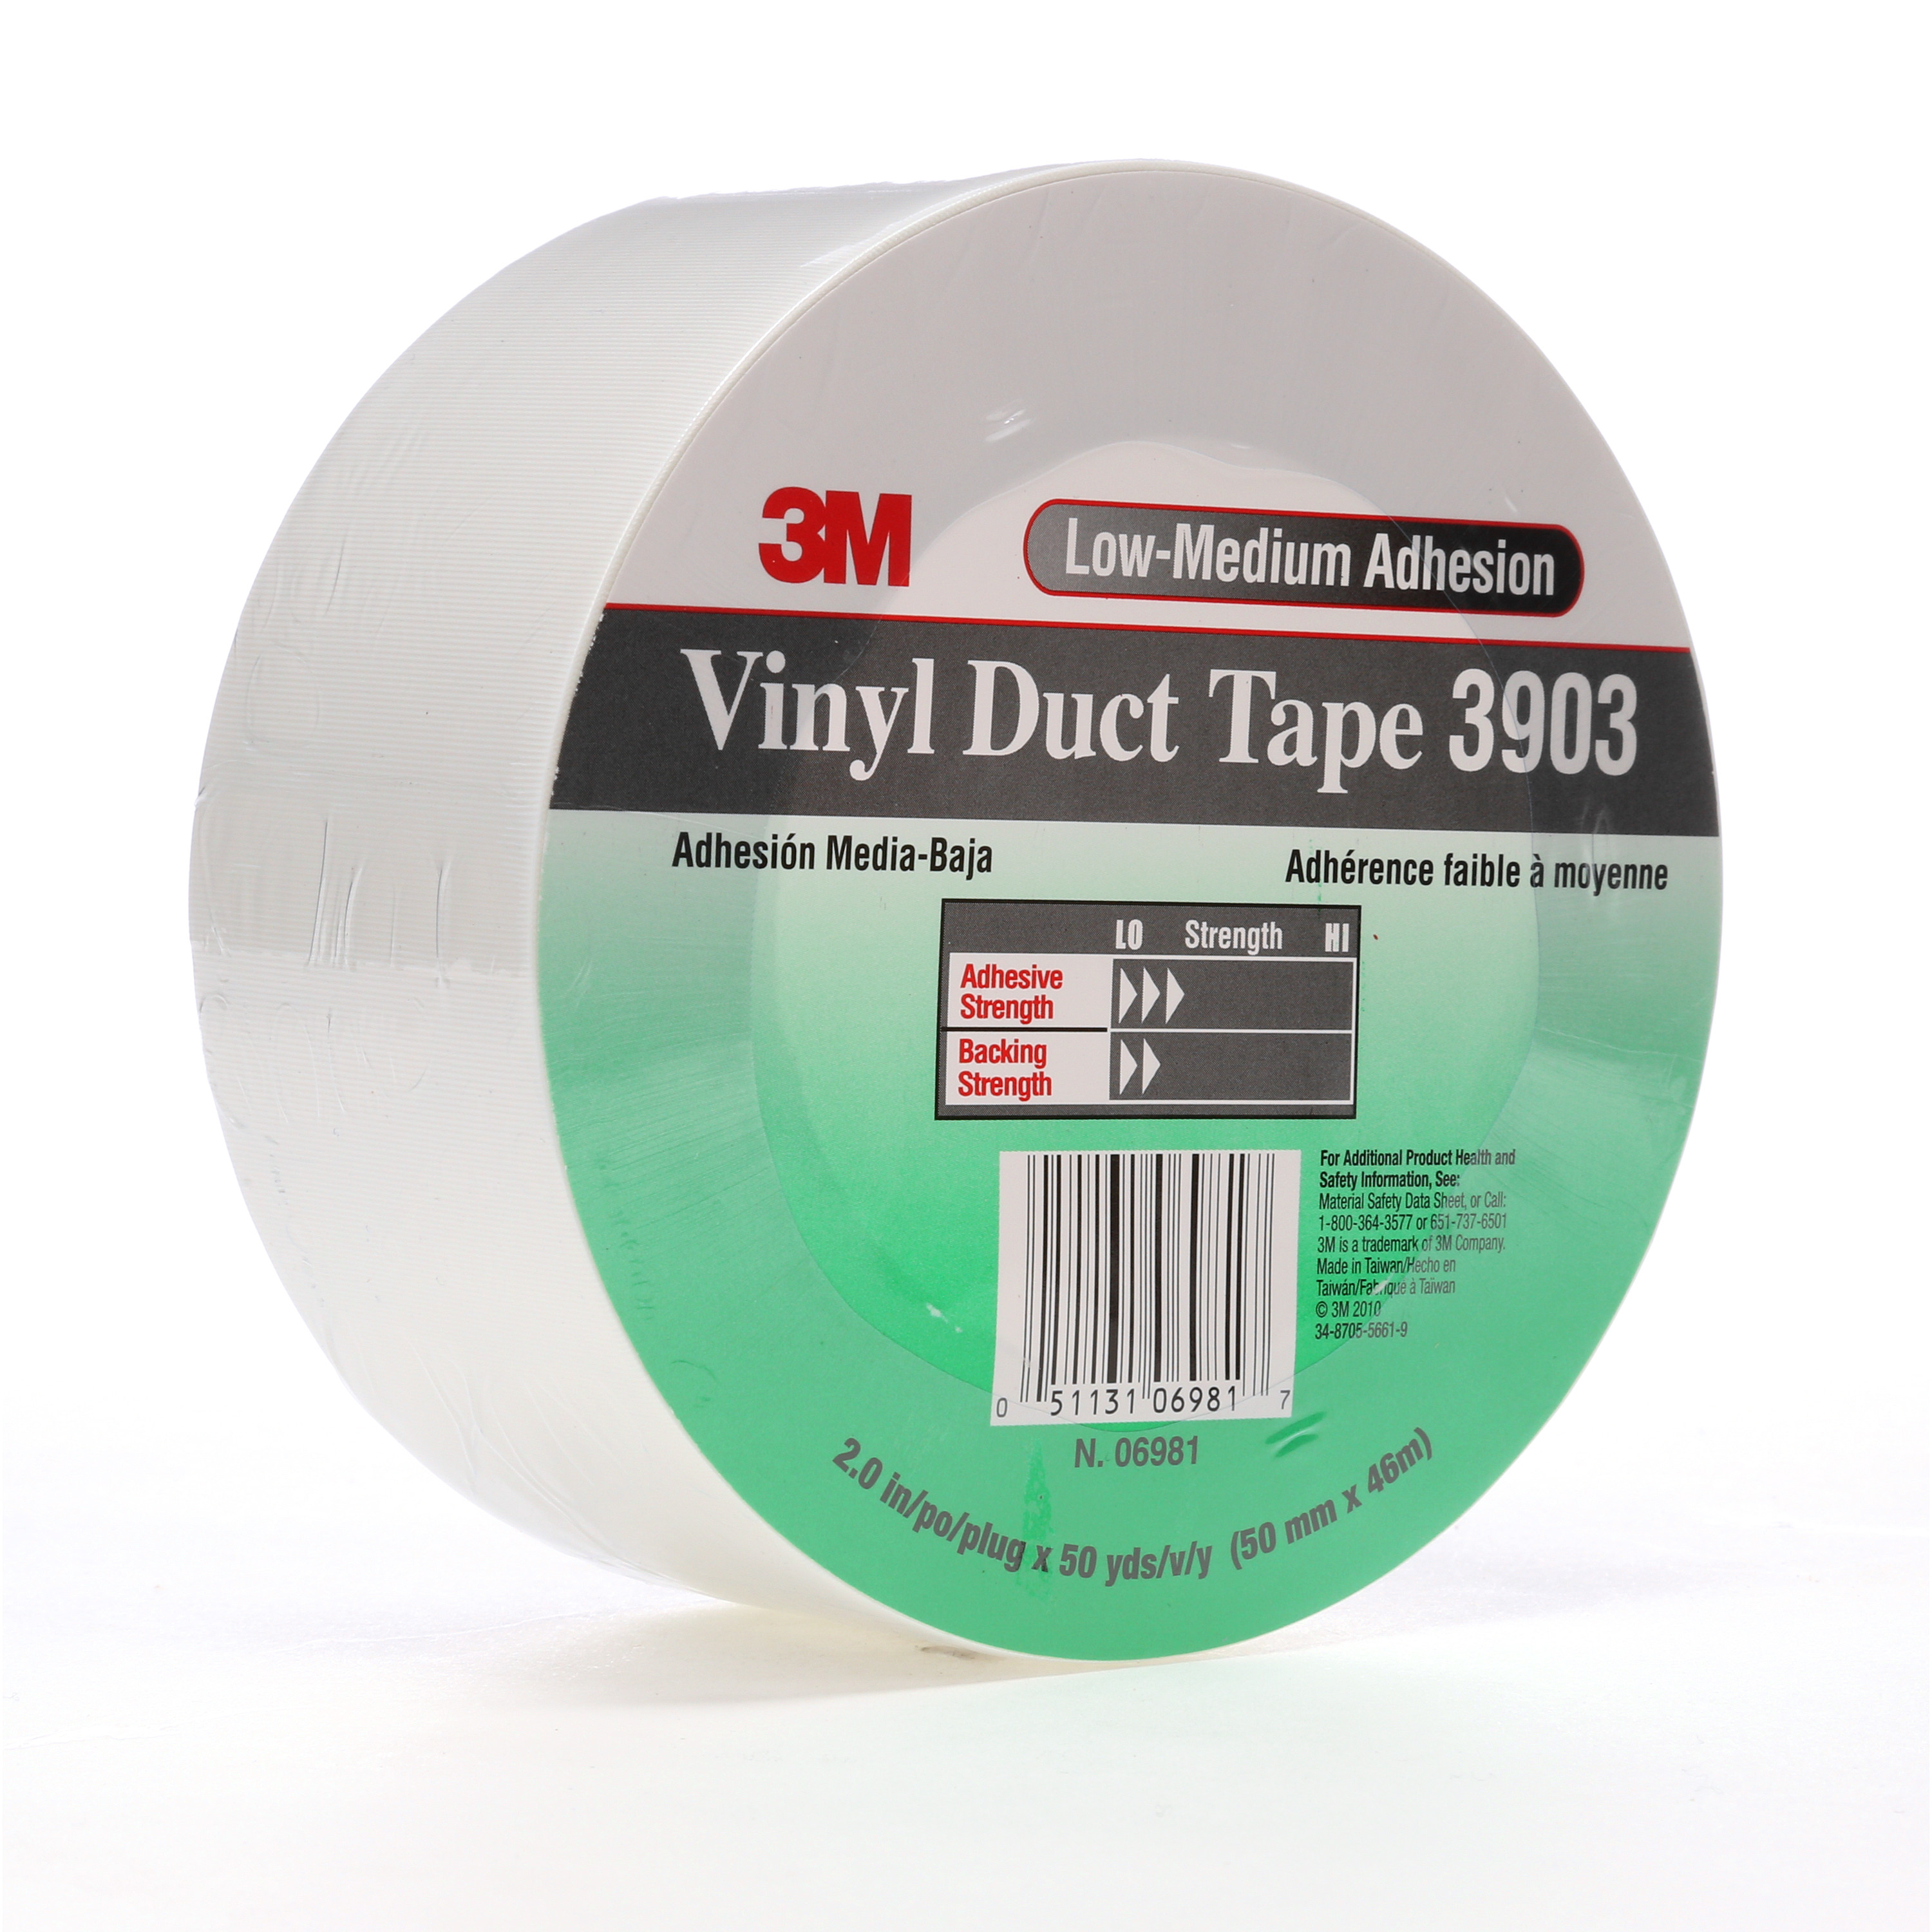 3M™ Vinyl Duct Tape 3903, White, 2 in x 50 yd, 6.5 mil, 24 per case,
Individually Wrapped Conveniently Packaged